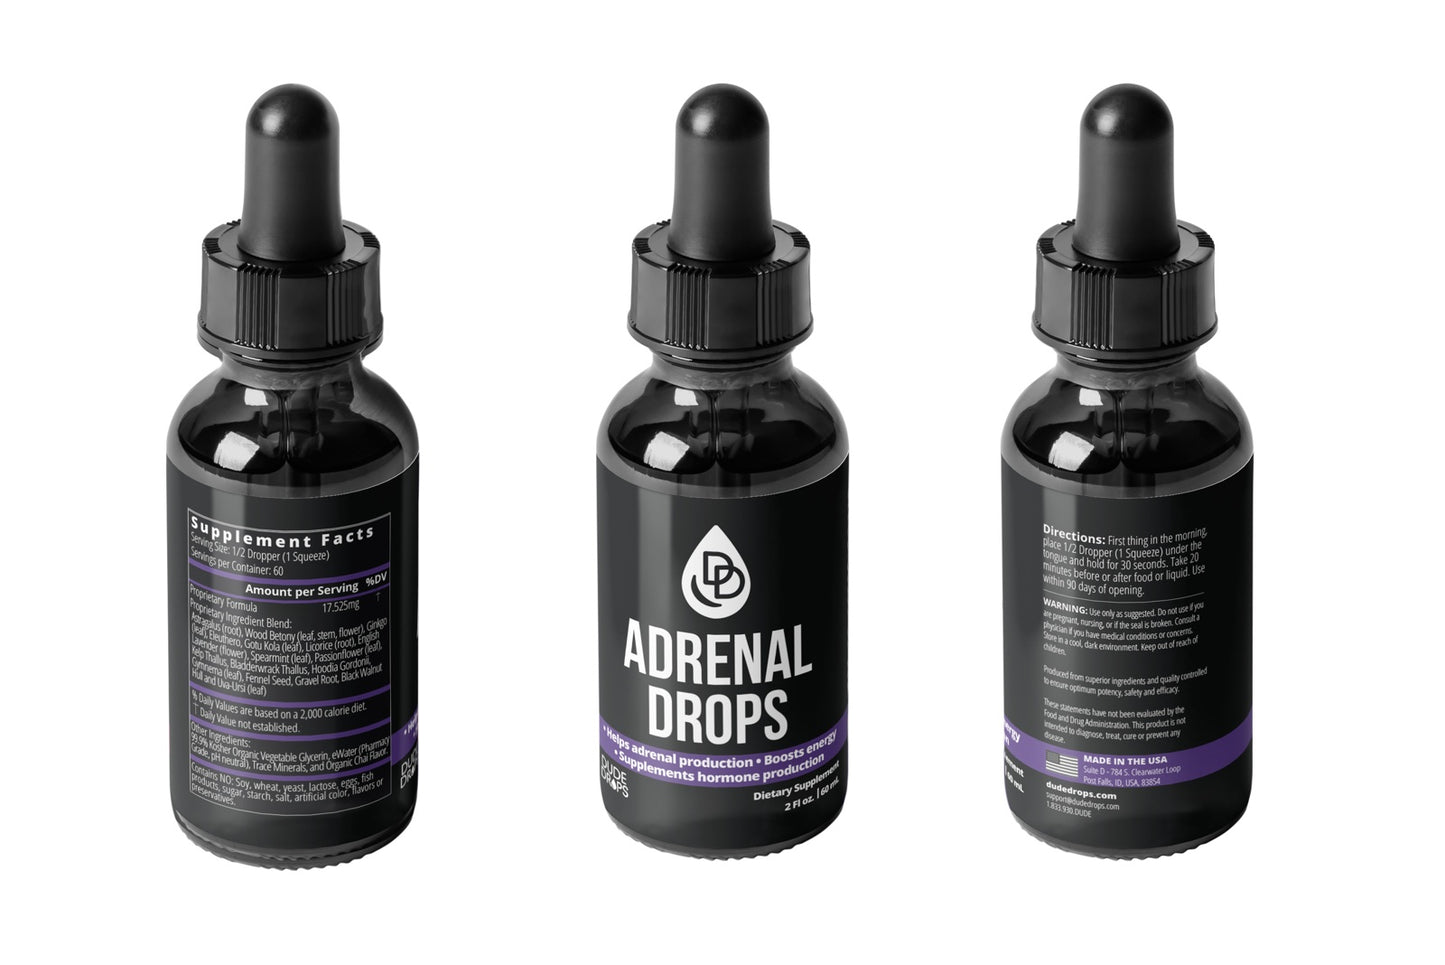 Adrenal Drops (2-3 month supply)